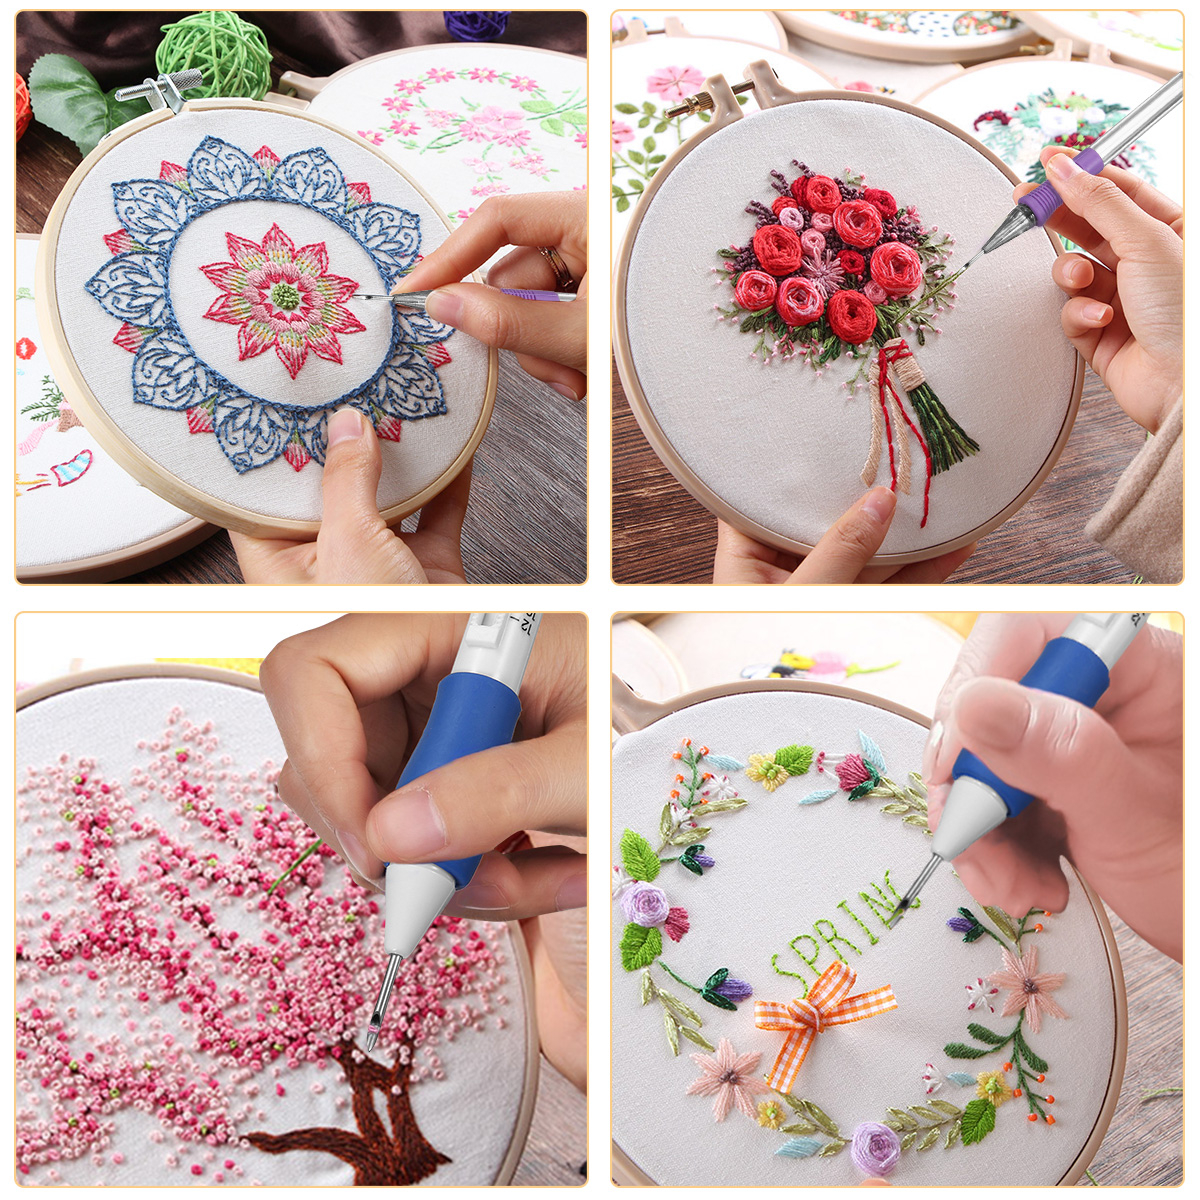 Korean Embroidery Patterns Magic Embroidery Pen Punch Needle Set Embroidery Patterns Punch Needle Kit Knitting Sewing Diy Tool